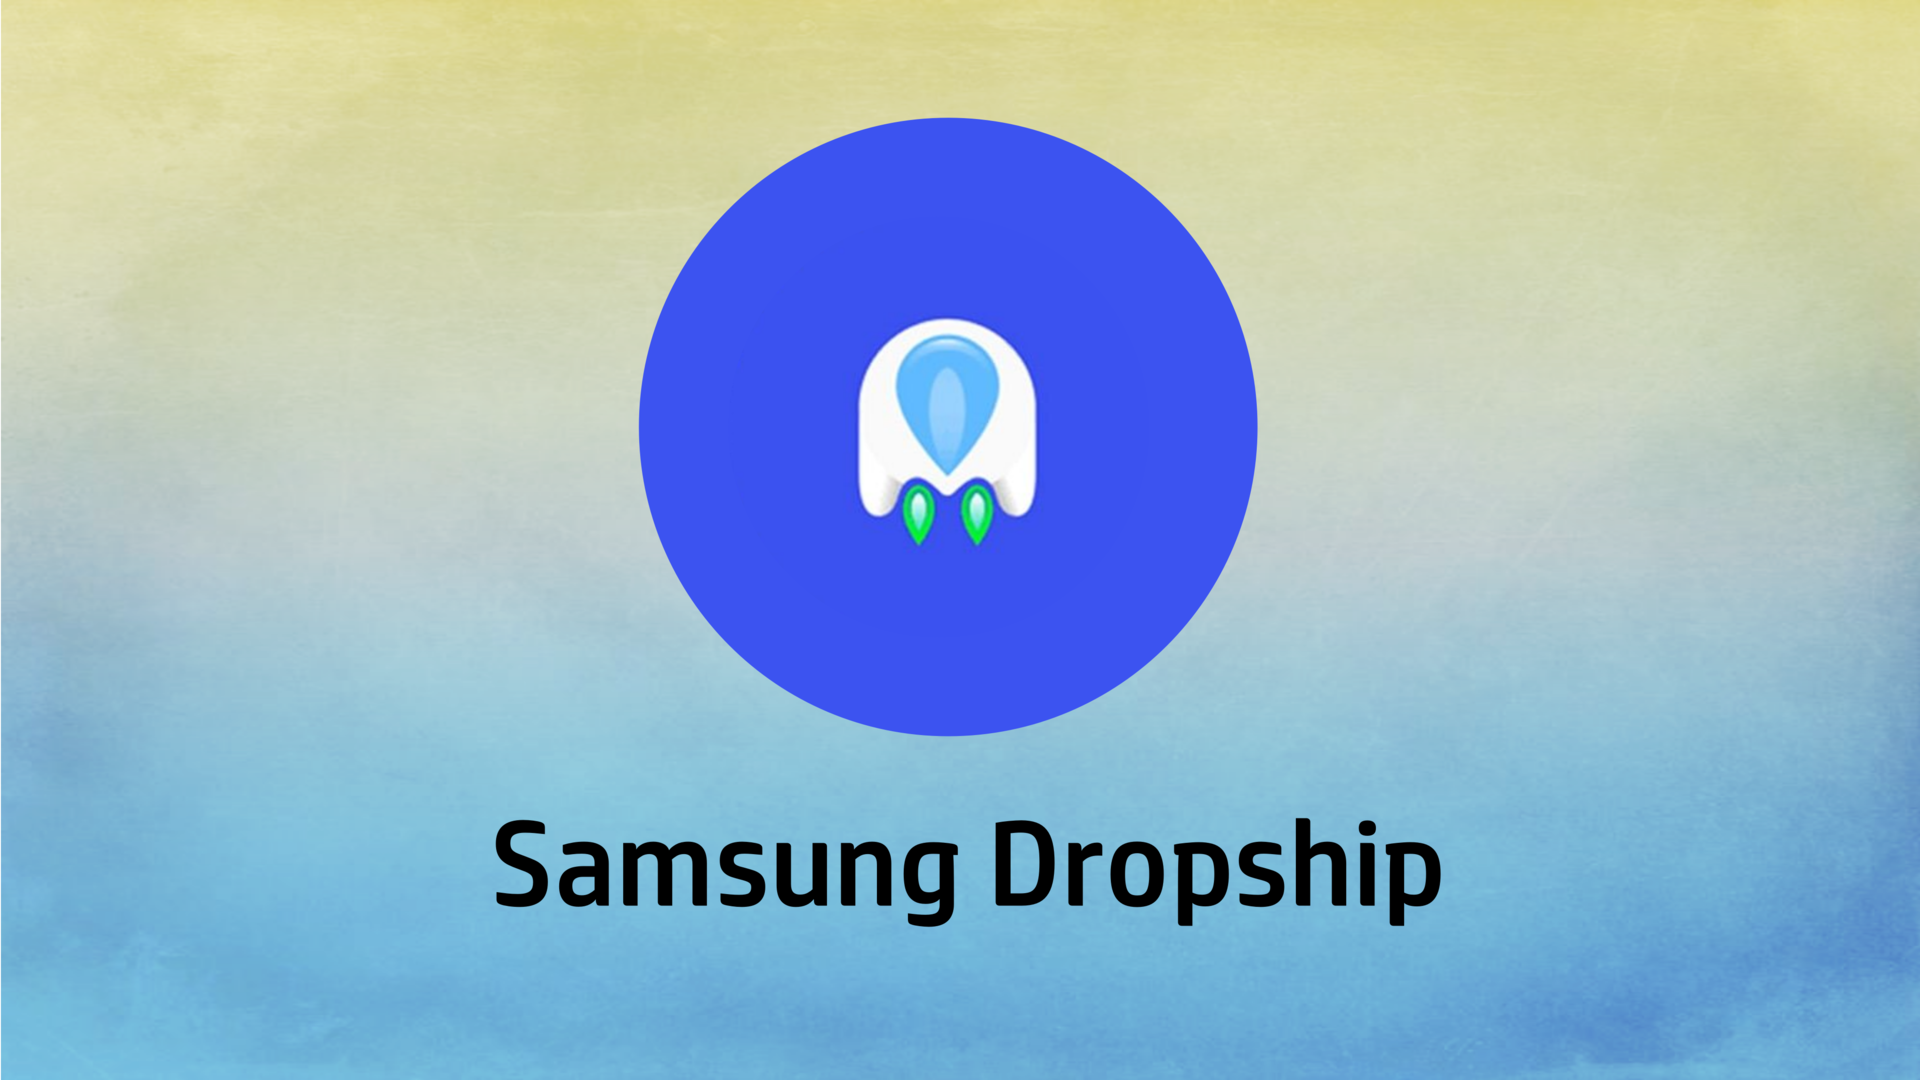 Samsung launches 'Dropship' app for cross-platform file sharing